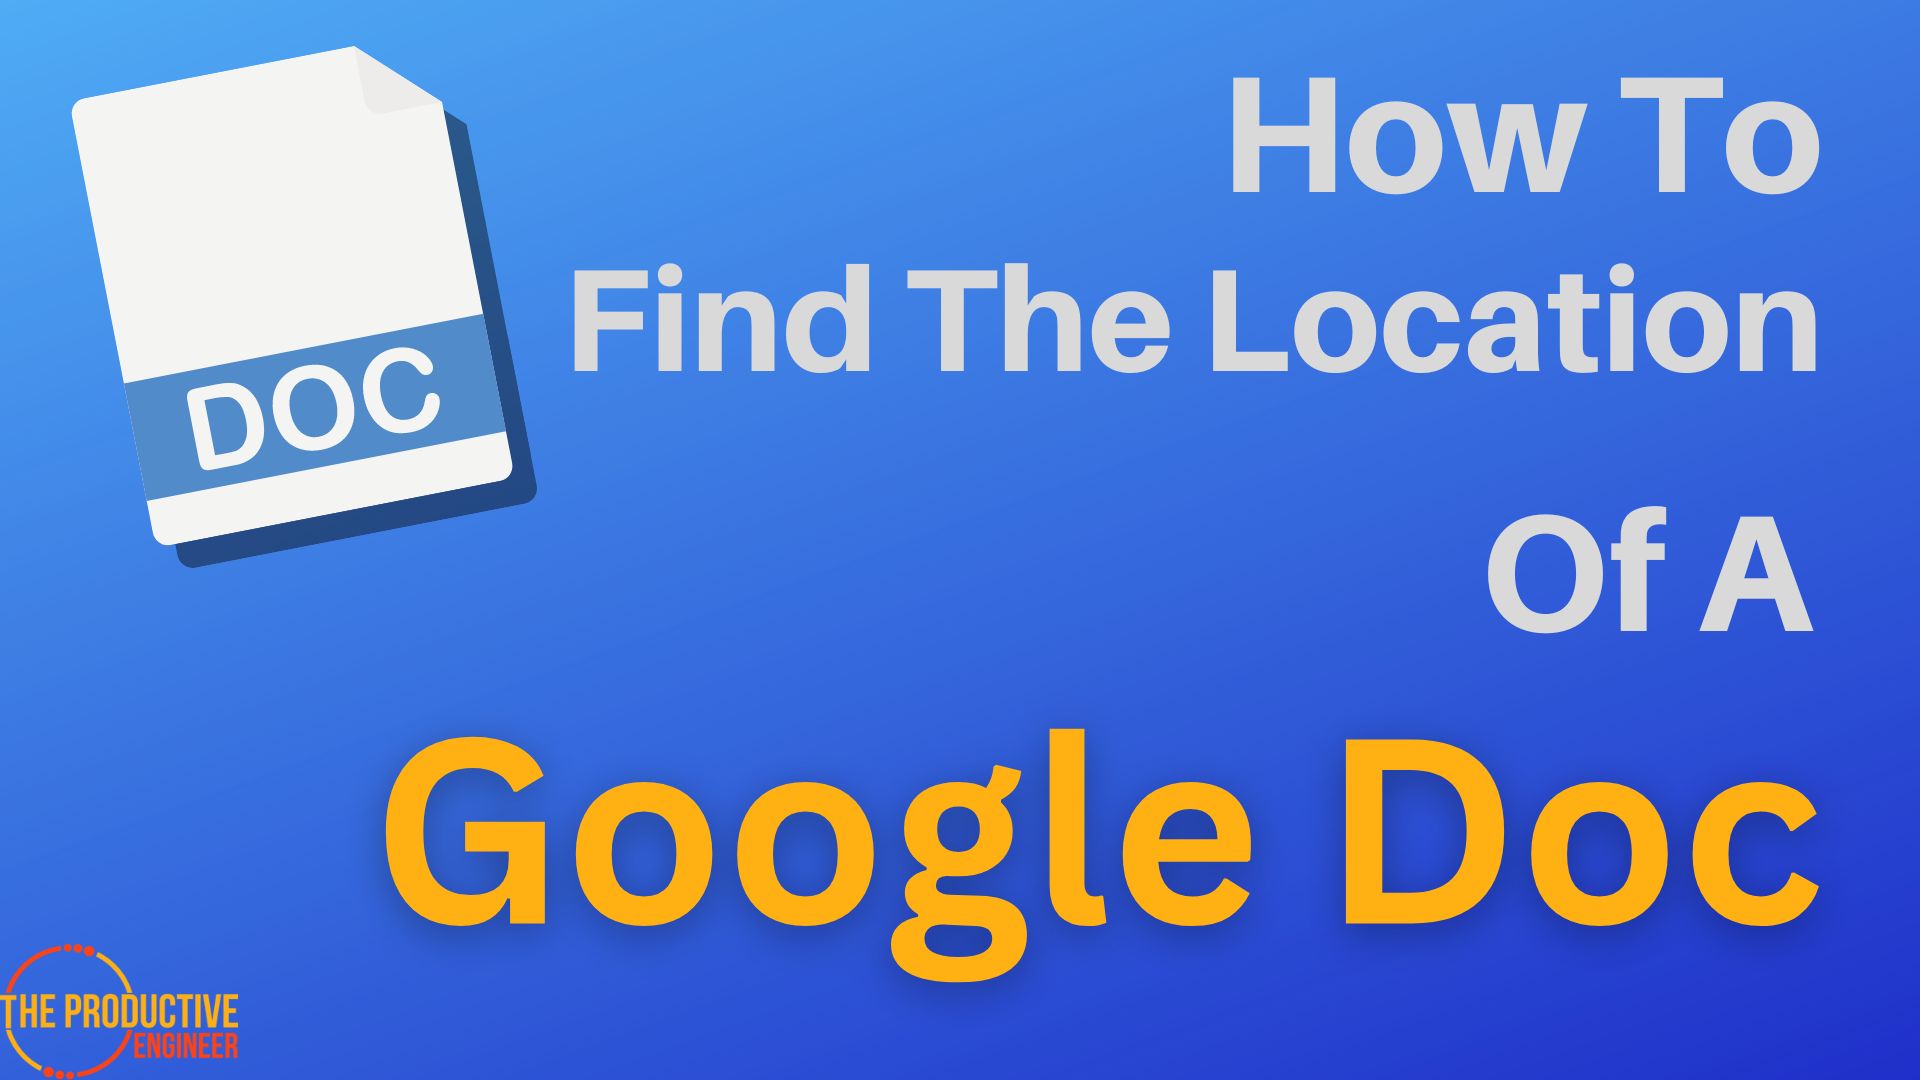 How To Find The Location Of A Google Doc